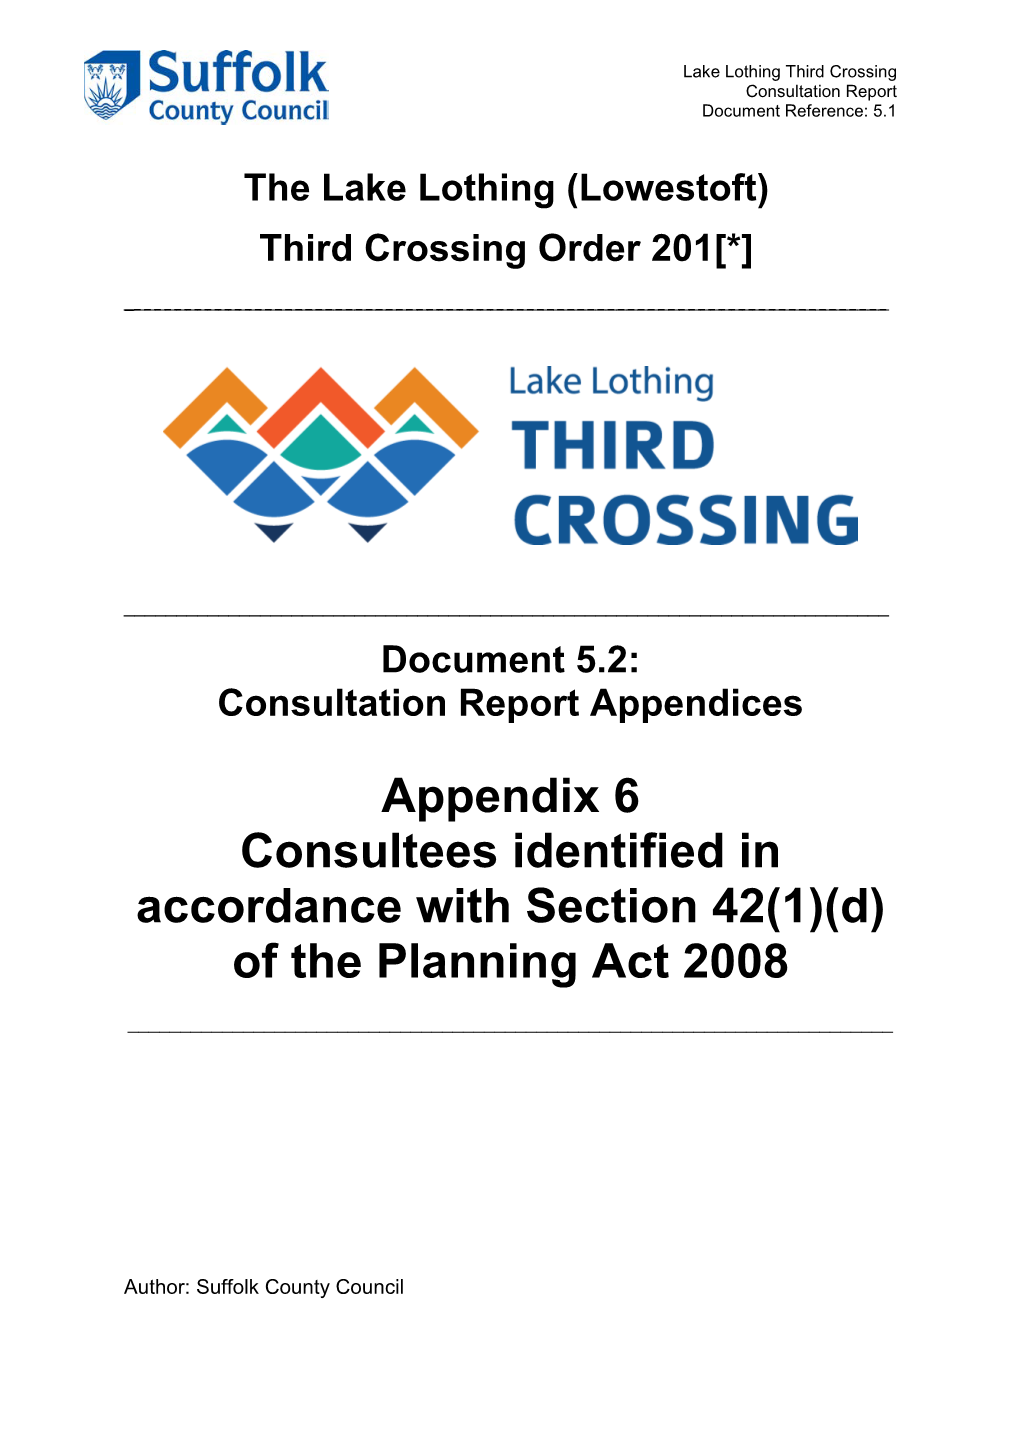 Appendix 6 Consultees Identified in Accordance with Section 42(1)(D) of the Planning Act 2008